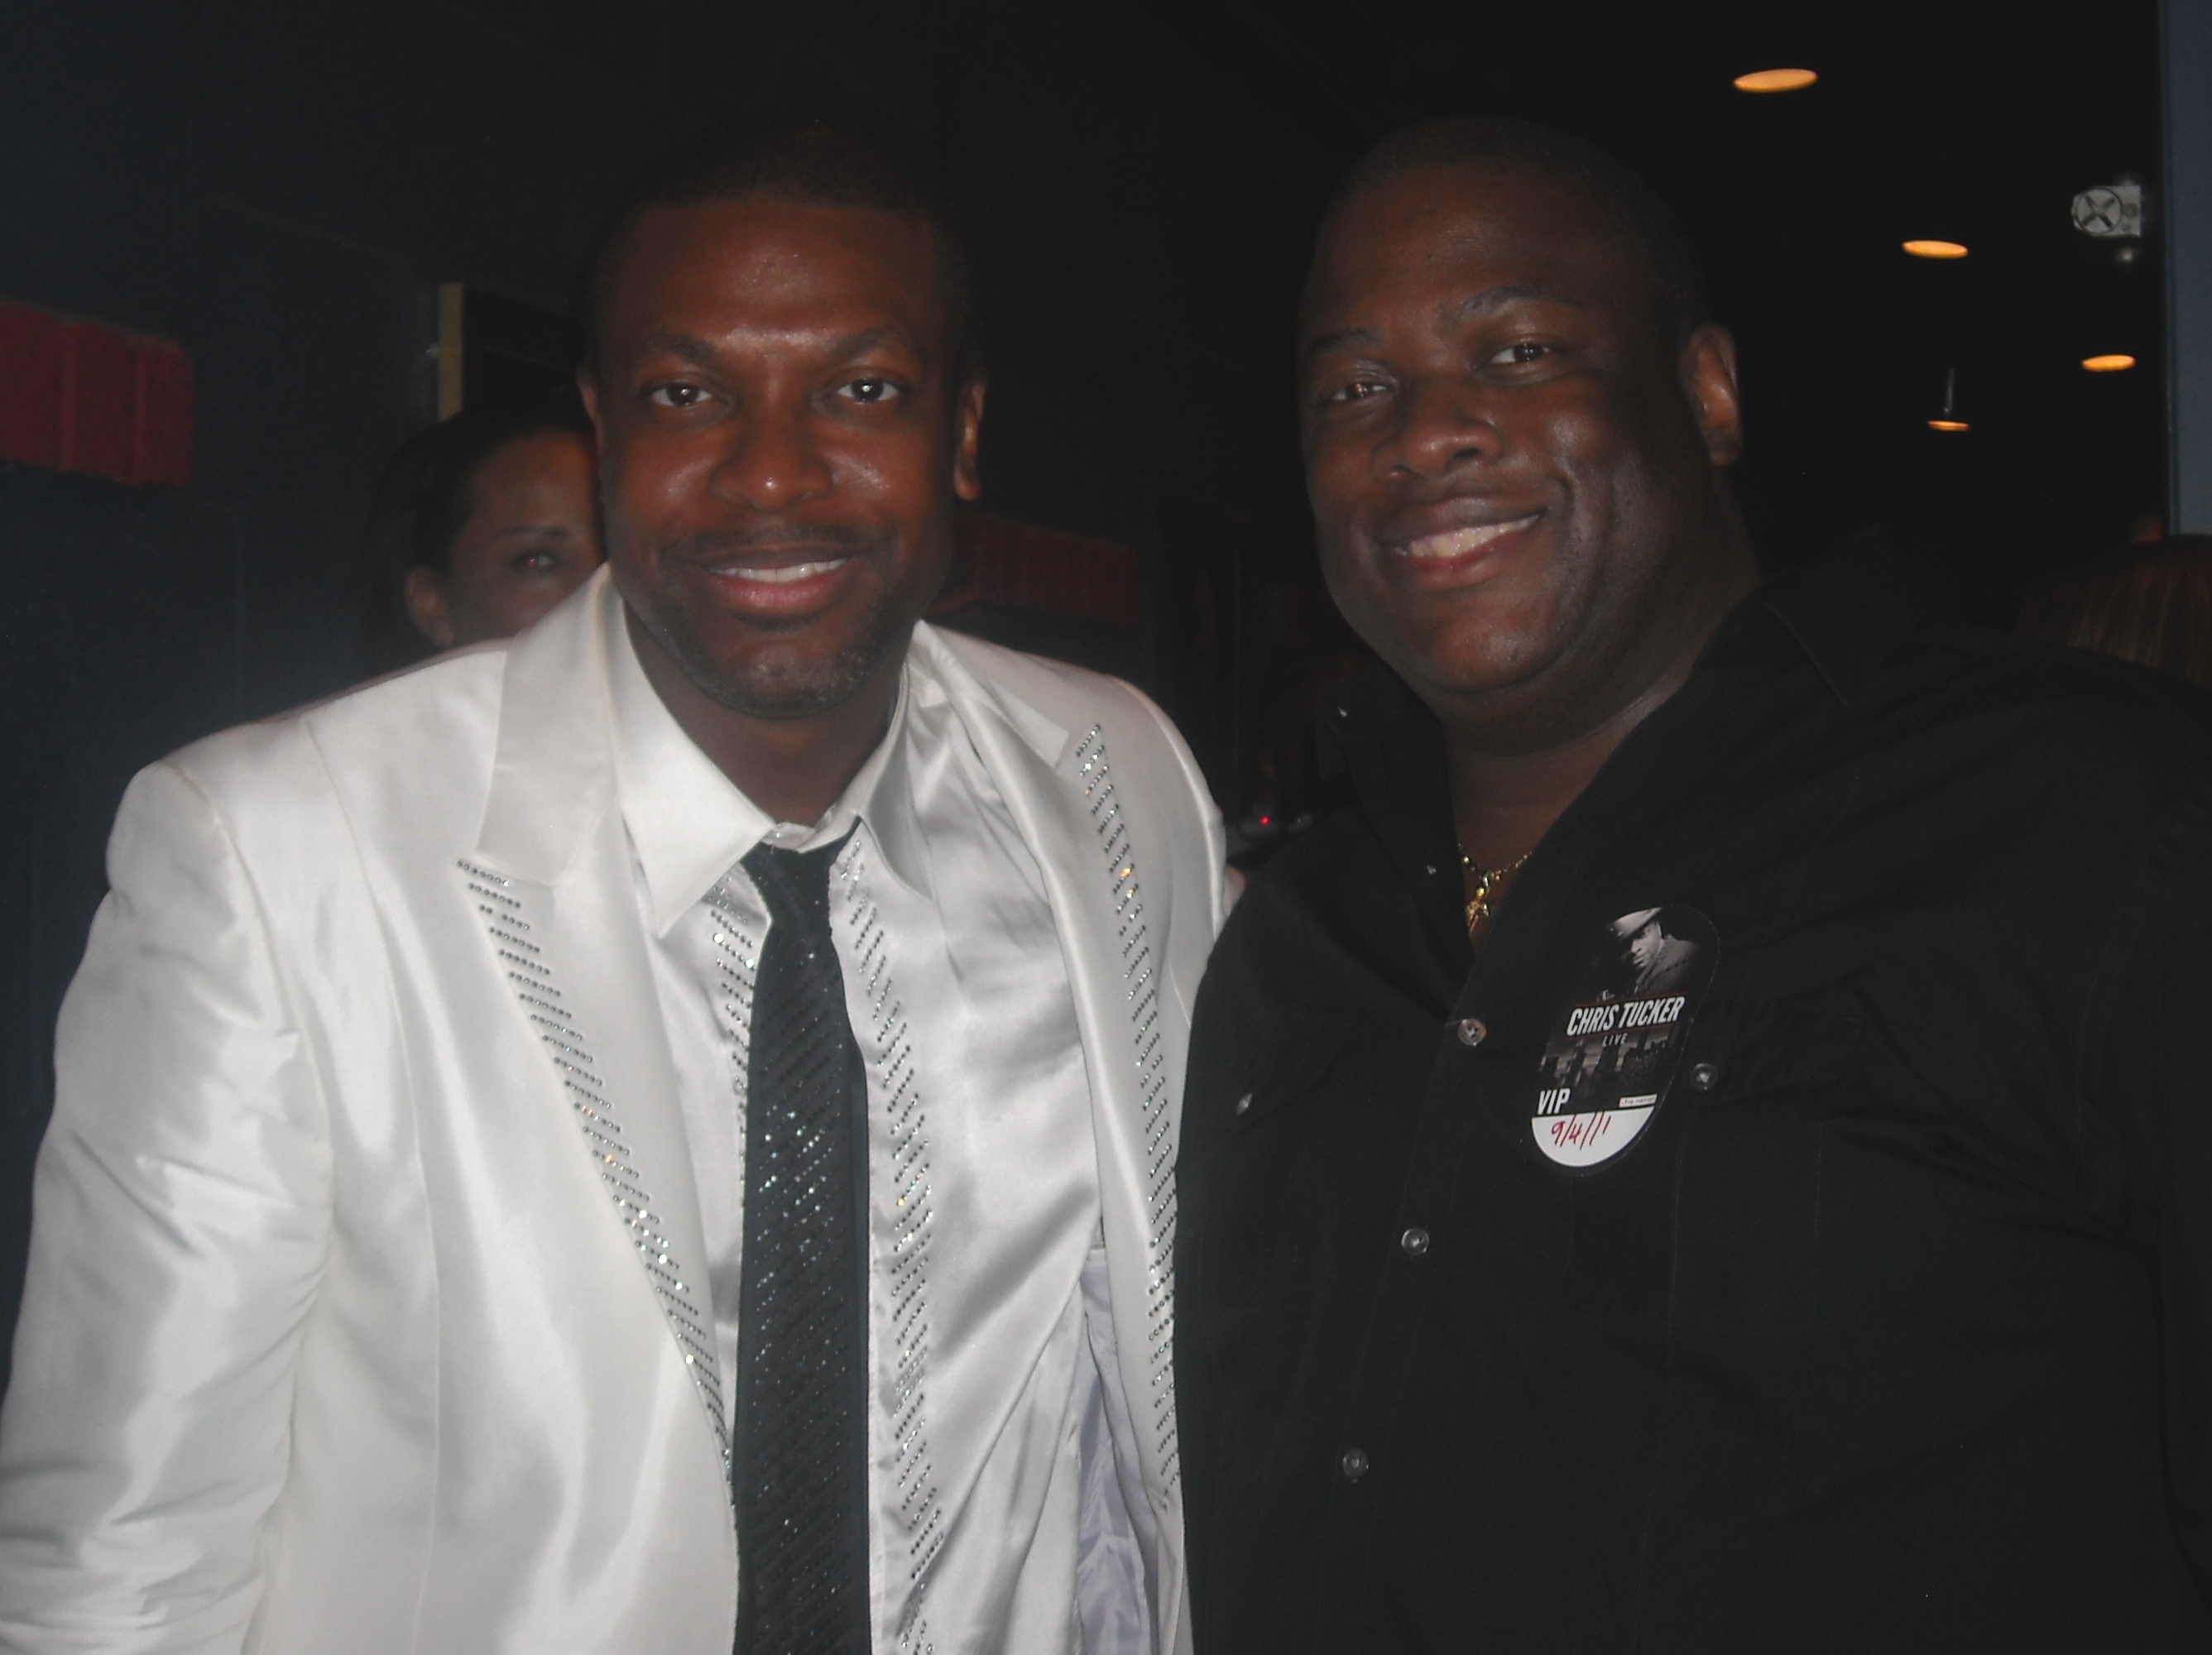 Chris Tucker and Michael J. Arbouet at the Chris Tucker Live show in Westbury, NY